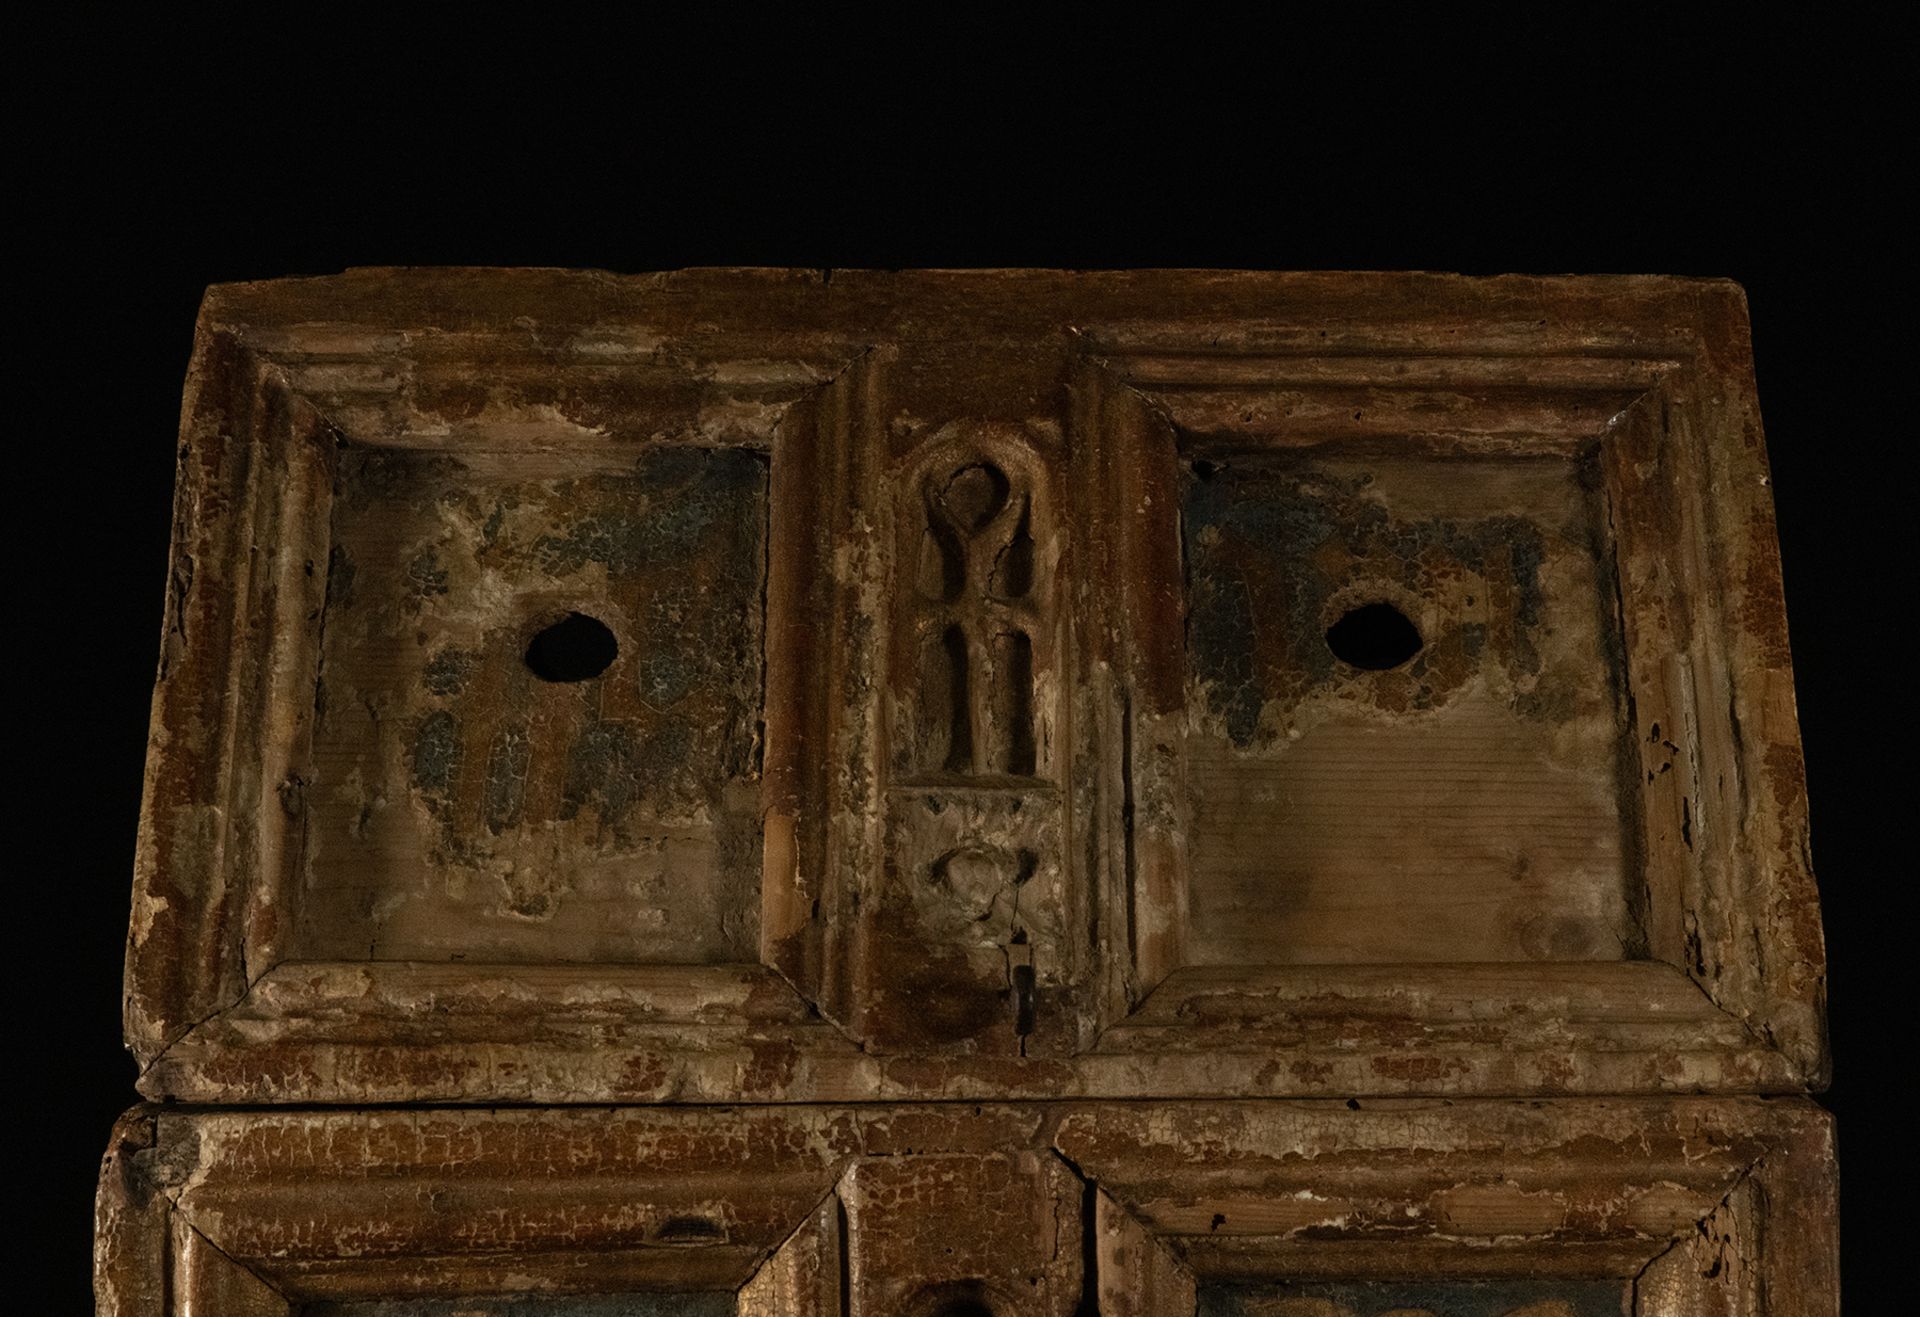 Exceptional Catalan Gothic Casket from the end of the 13th century - beginning of the 14th century,  - Image 2 of 6